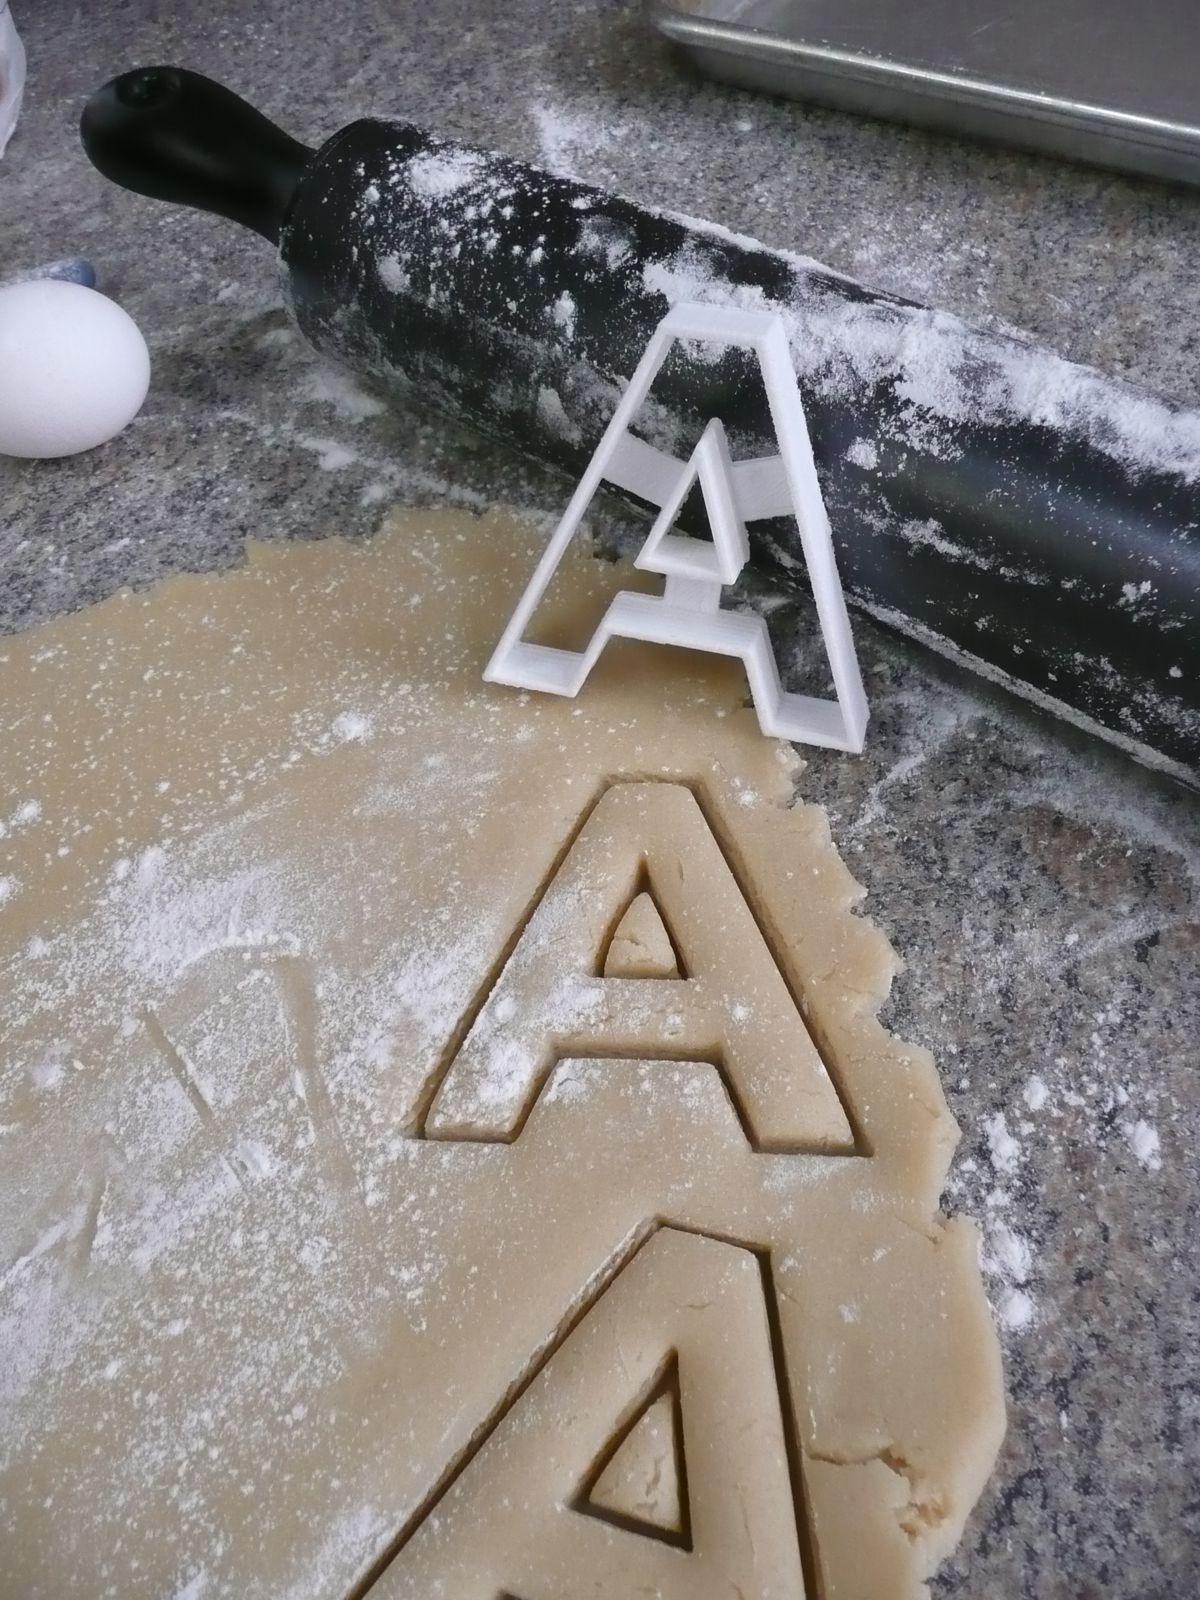 Alphabet Letters Complete Set Of 26 Cookie Cutters USA PR1012